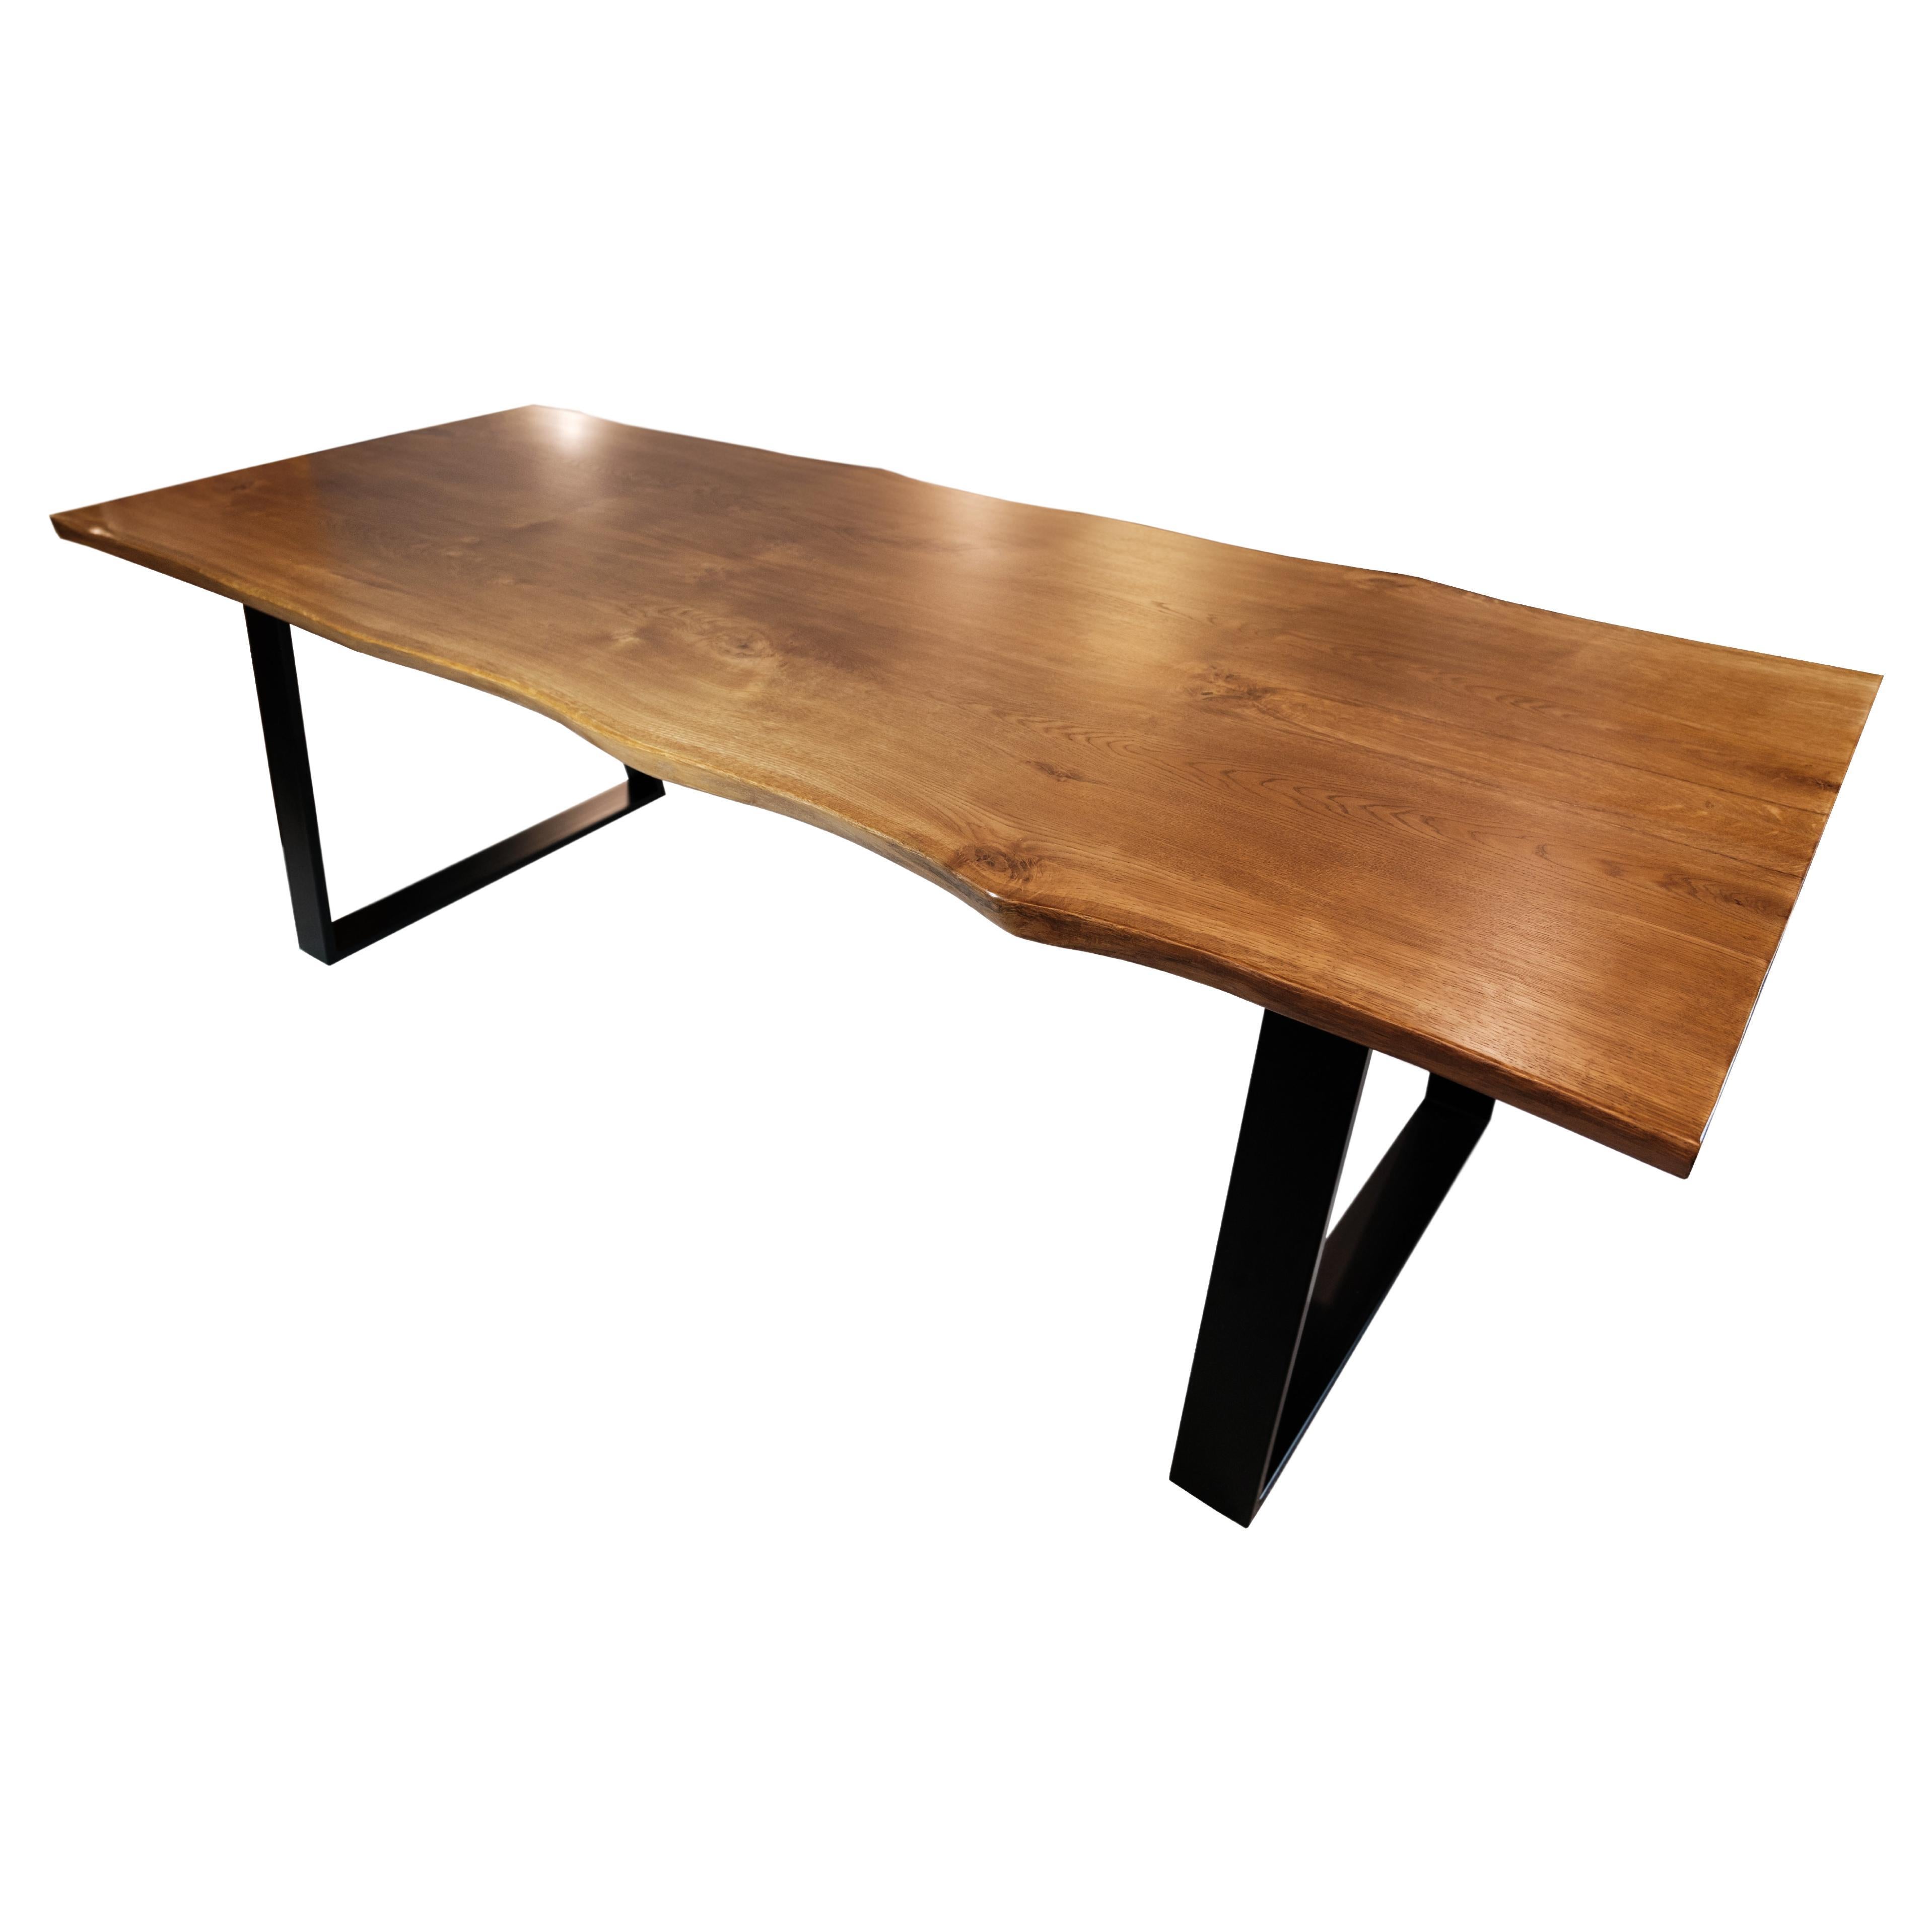 Plank Table Made In Oak With A Black Metal Frame  For Sale